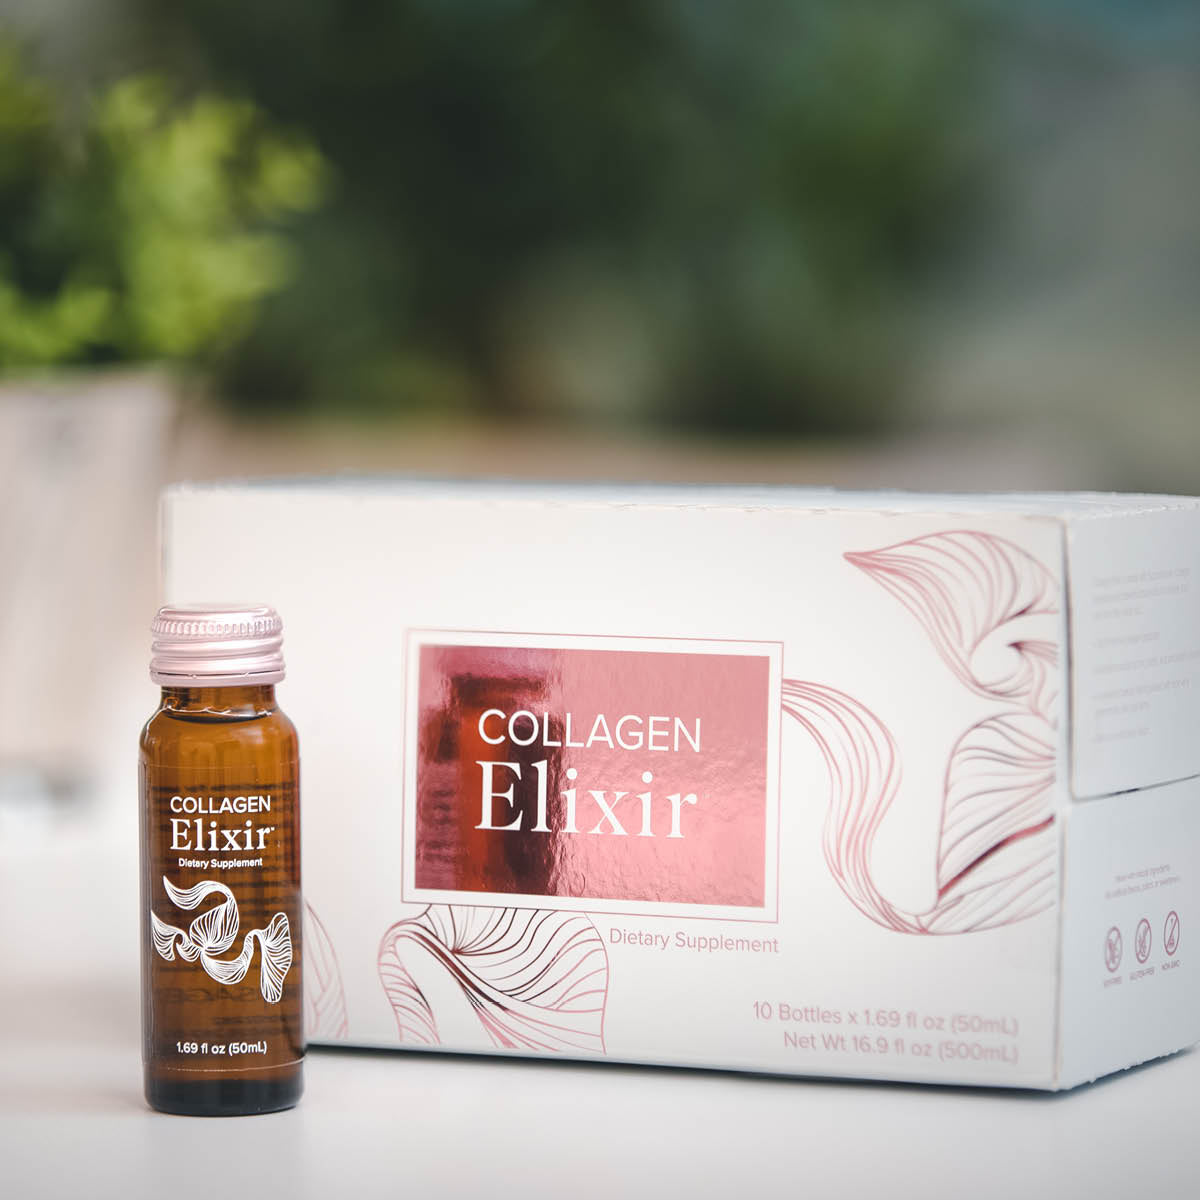 Collagen Elixir - 10 packs with 100 bottles of 50ml each for 3 months++